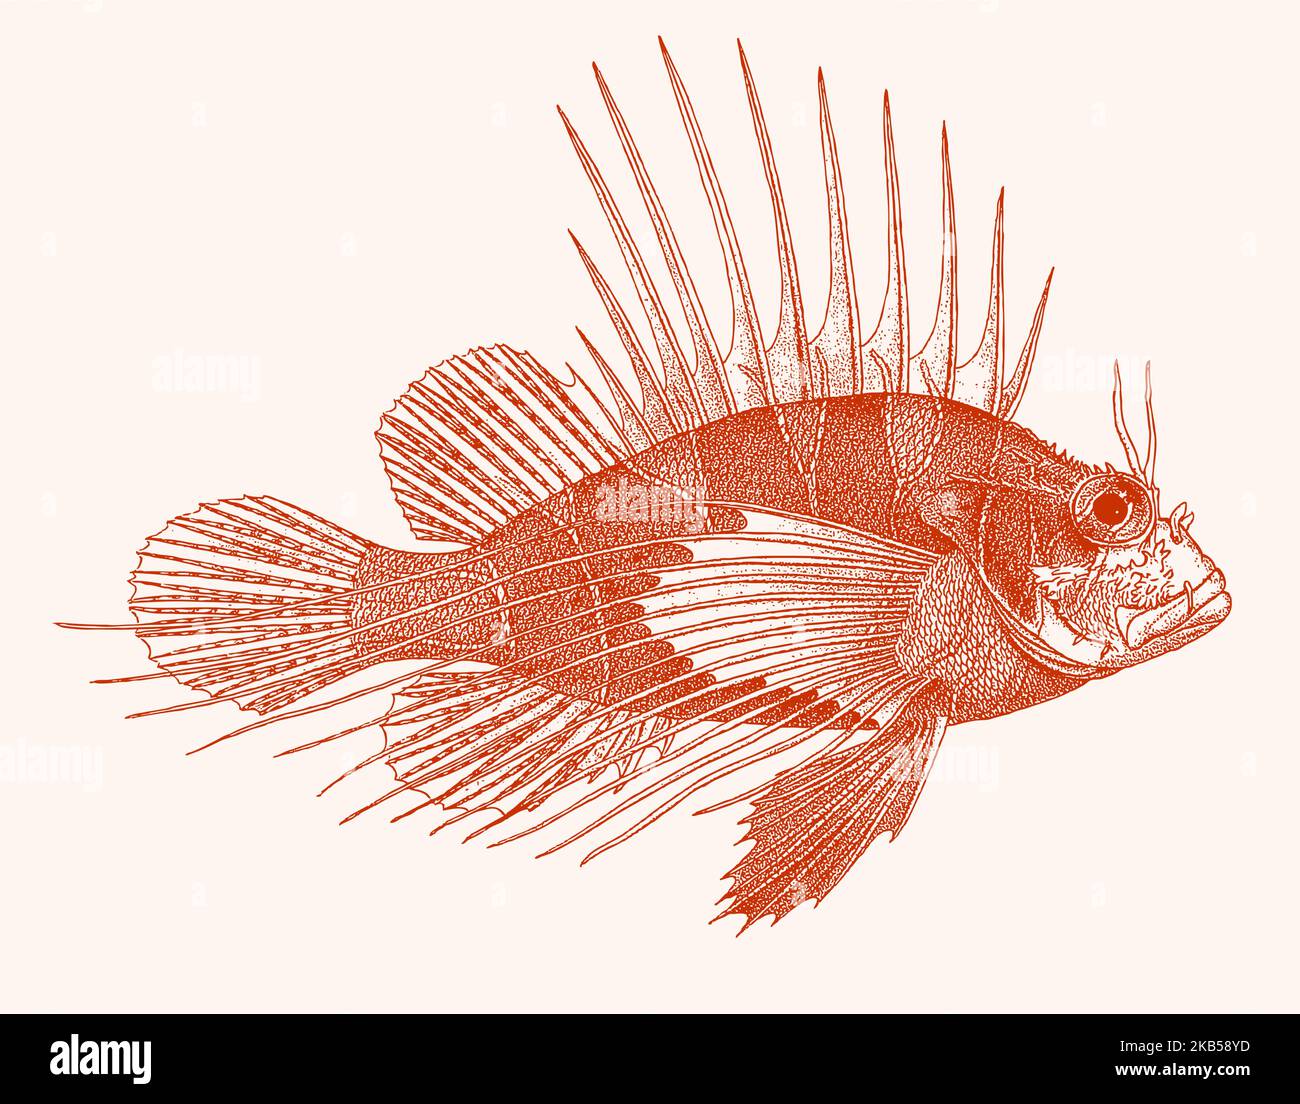 Red sea lionfish pterois cincta, venomous coral reef fish in side view Stock Vector